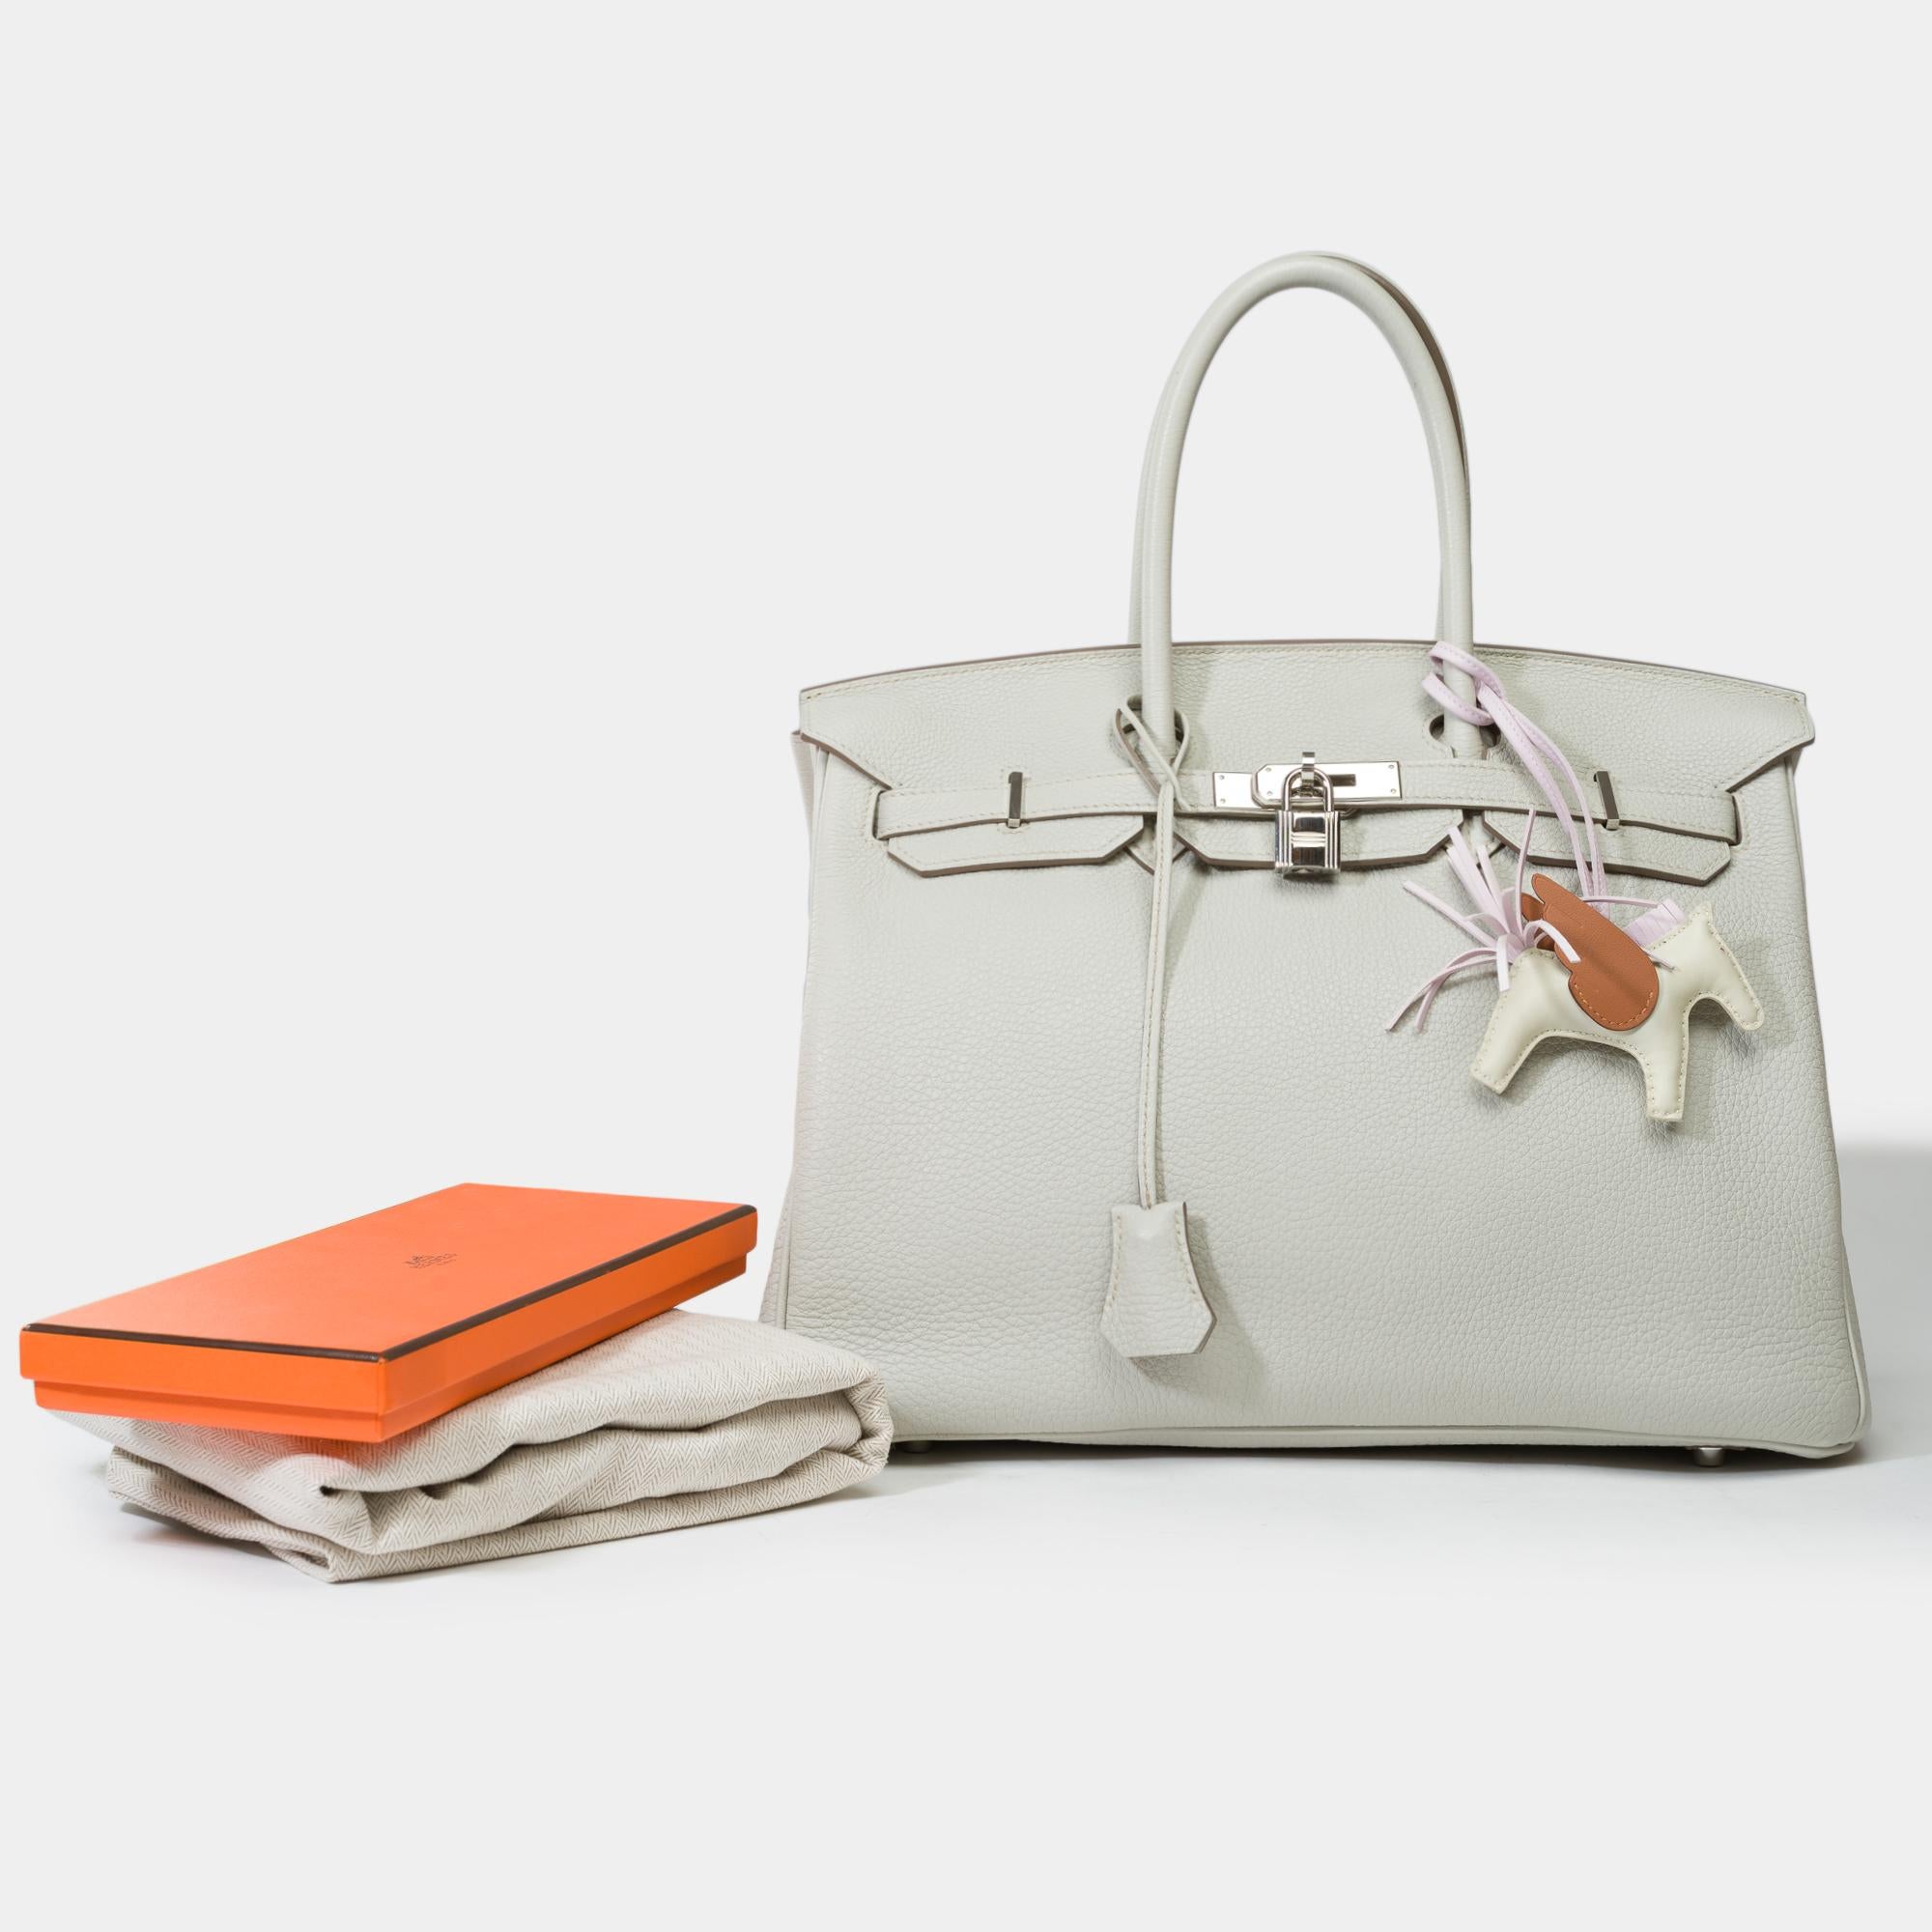 Exceptional​ ​Hermes​ ​Birkin​ ​35​ ​handbag​ ​in​ ​Gris​ ​Perle​ ​Togo​ ​leather​ ​,​ ​silver​ ​metal​ ​Palladium​ ​trim,​ ​double​ ​handle​ ​leather​ ​gray​ ​for​ ​a​ ​hand

Flap​ ​closure
Inner​ ​lining​ ​in​ ​grey​ ​leather​ ​,​ ​a​ ​zippered​